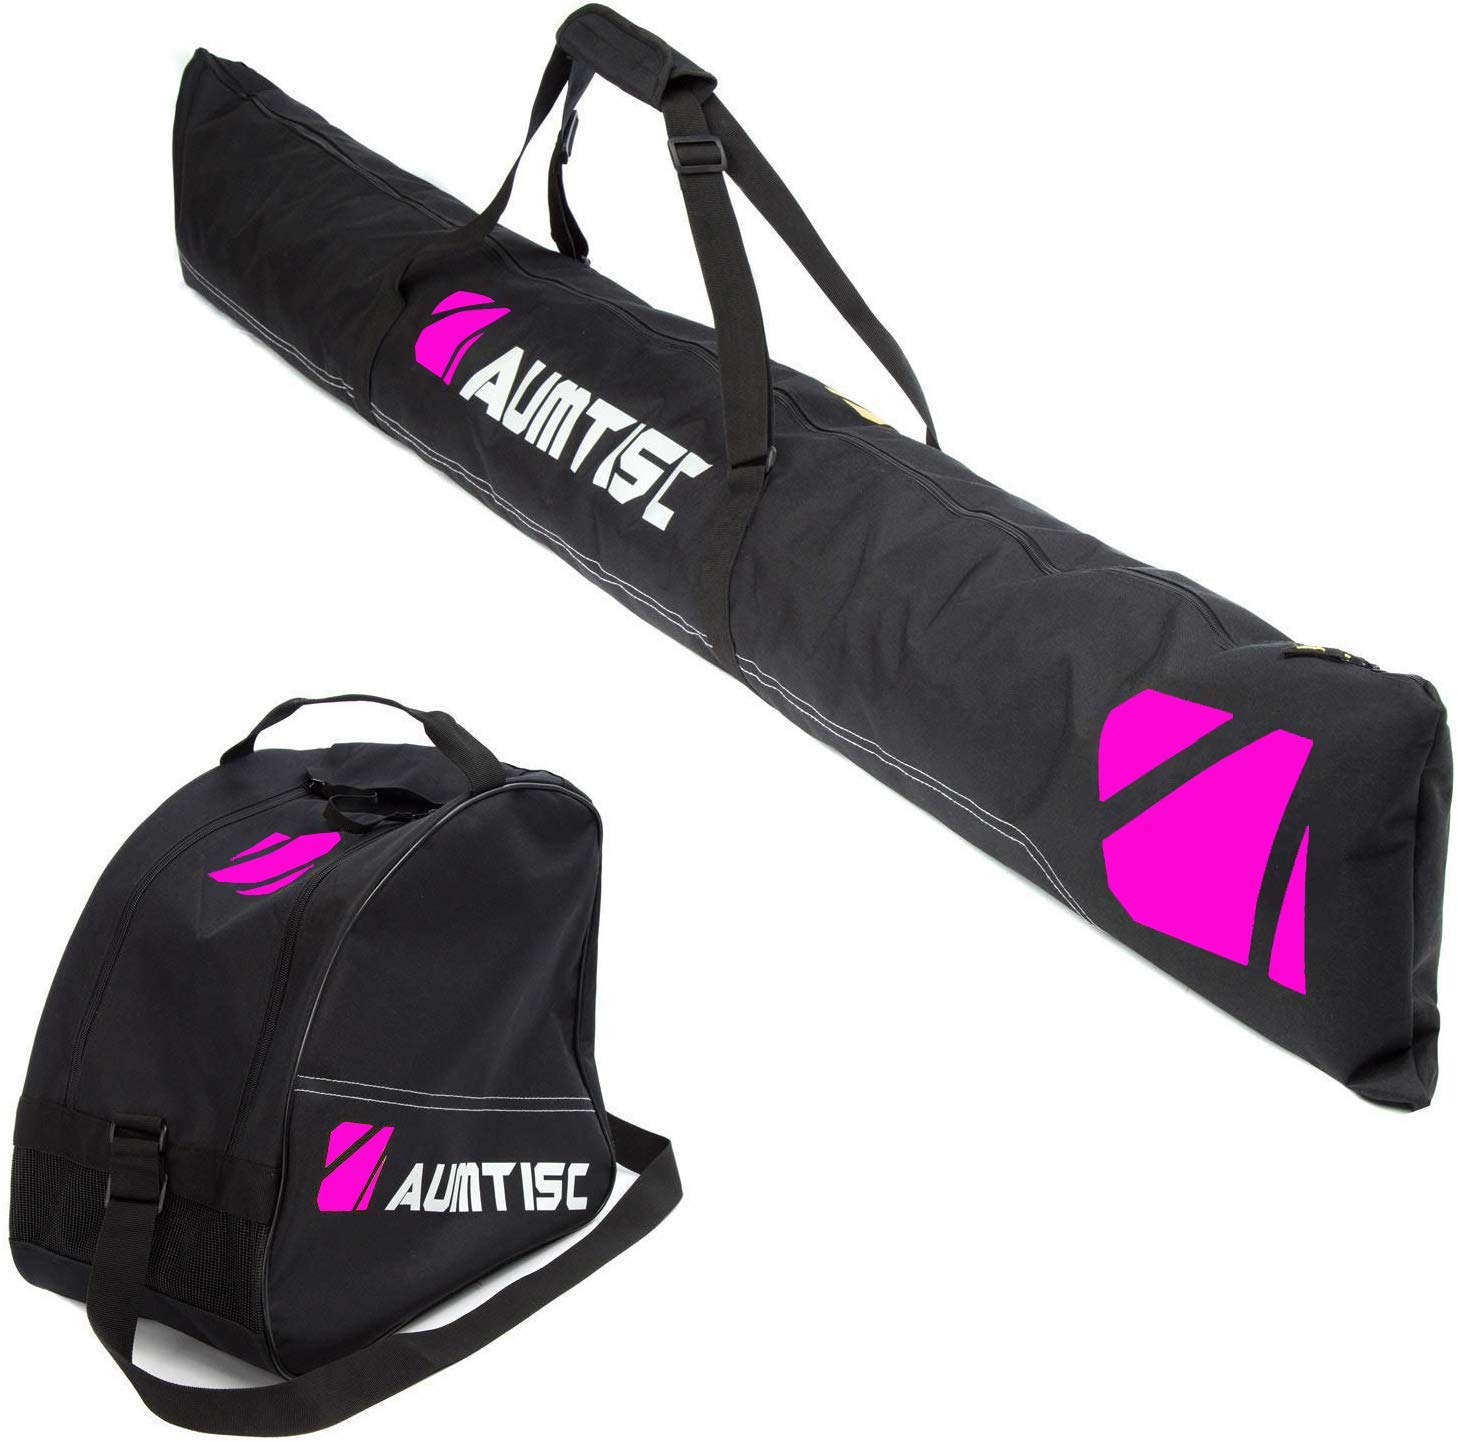 AUMTISC Padded Ski and Boot Bag Combo